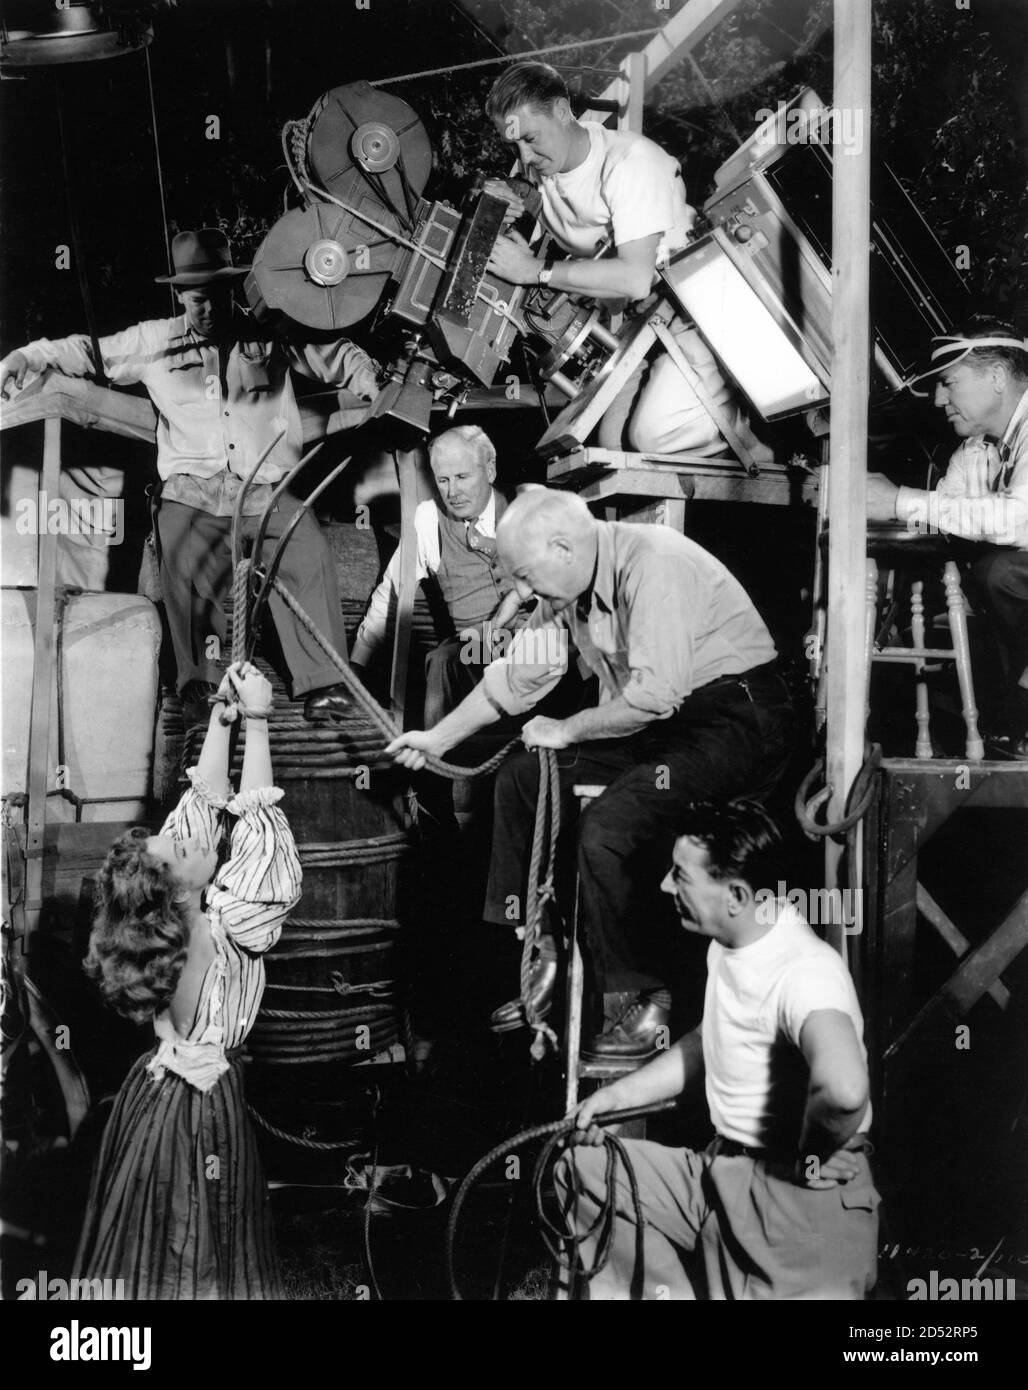 CECIL B. DeMILLE directing PAULETTE GODDARD with Cinematographer RAY RENNAHAN (with white hair) and Film Crew on set candid during filming of UNCONQUERED 1947 director CECIL B. DeMILLE  novel Neil H. Swanson music Victor Young Paramount Pictures Stock Photo